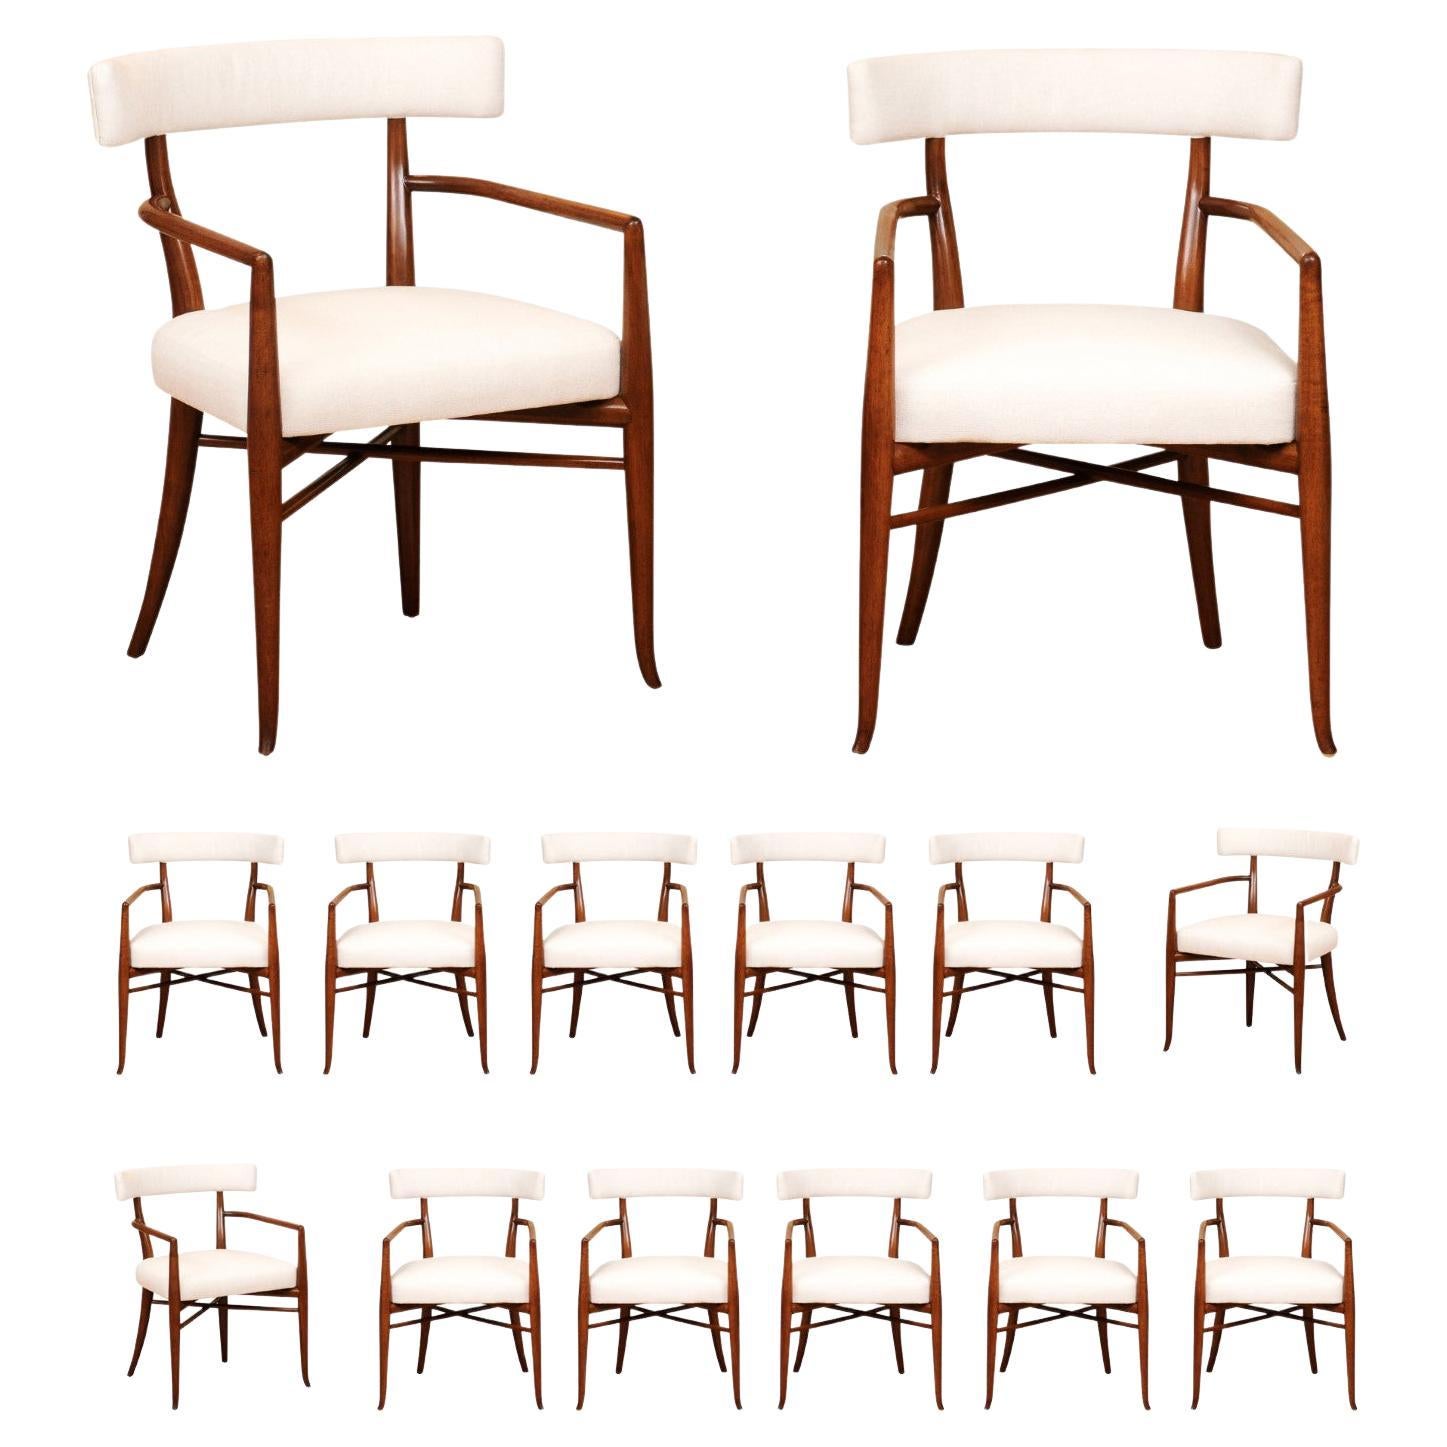 All Arms, Extraordinary Set of 14 Modern Klismos Chairs by Robsjohn-Gibbings For Sale